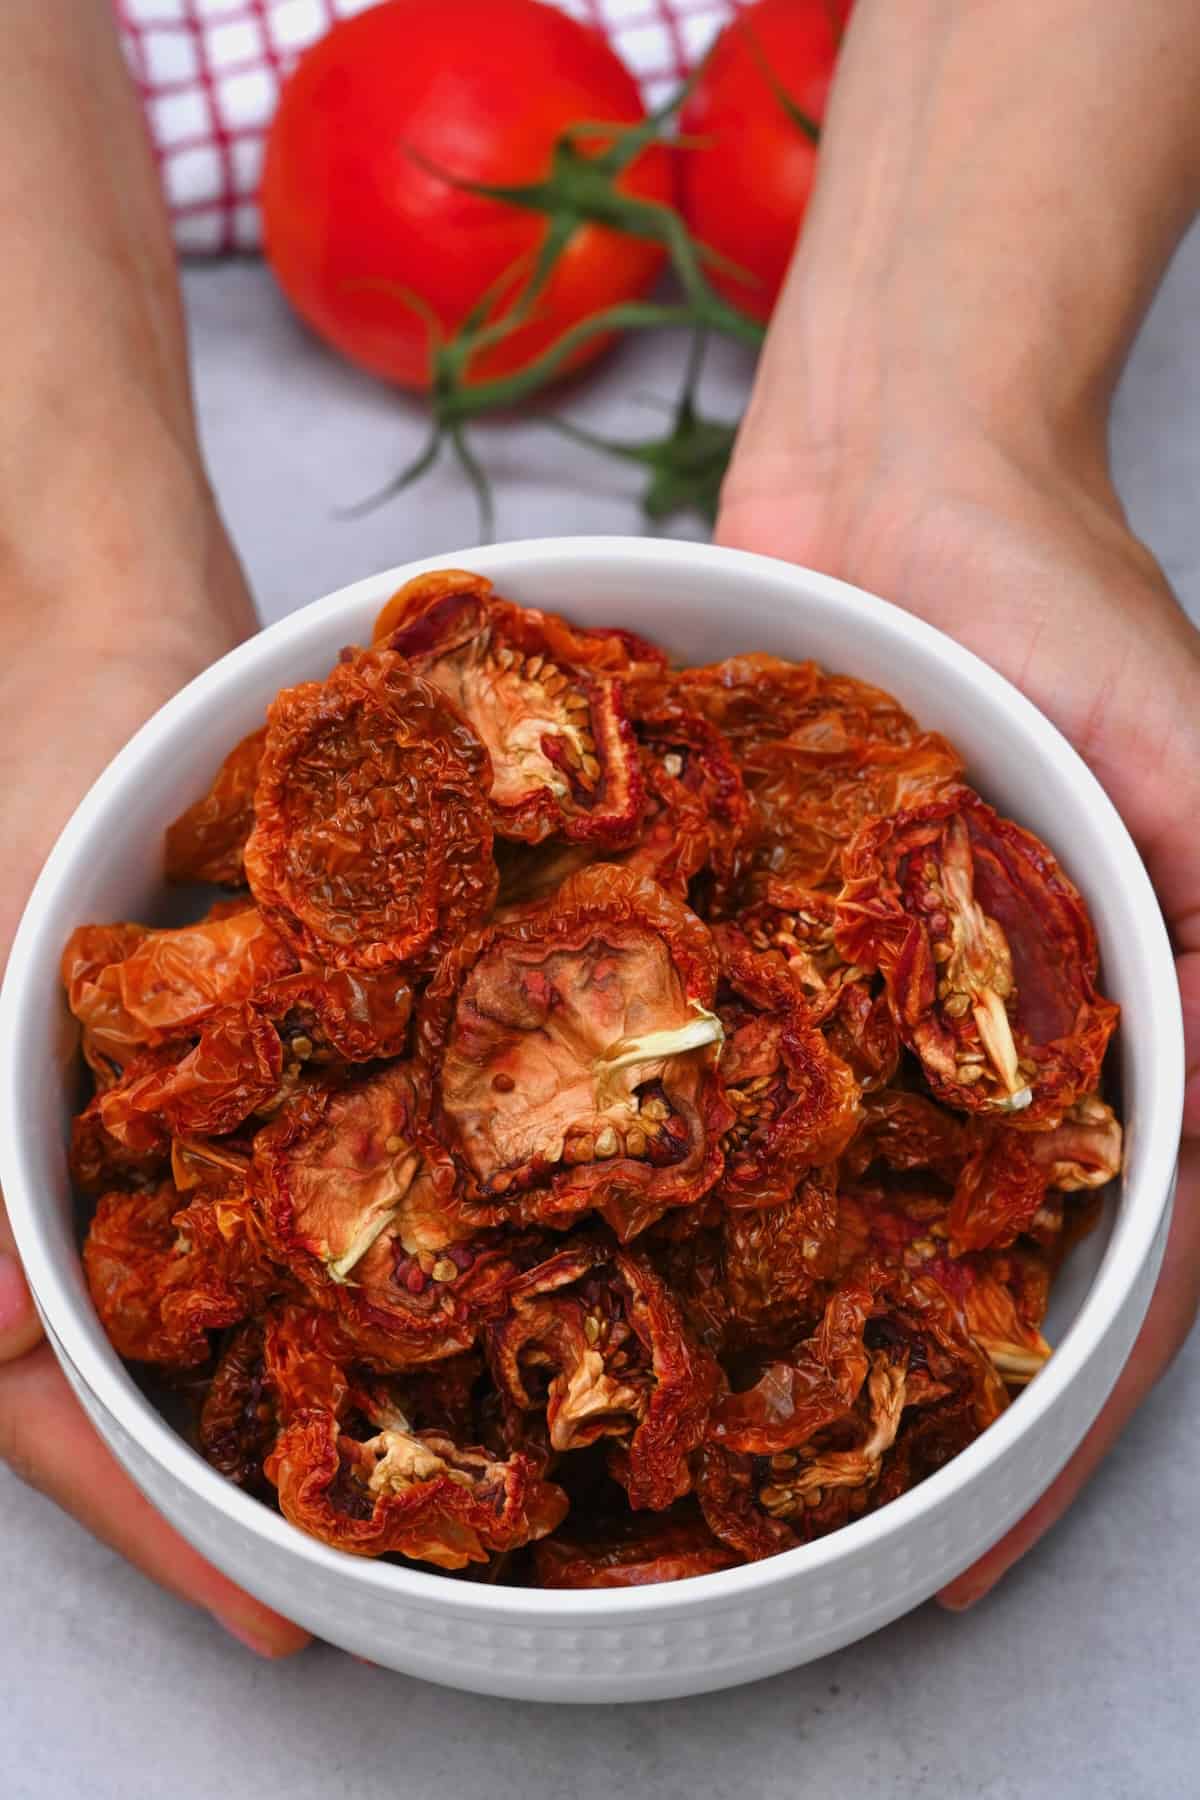 A bowl with homemade sun-dried tomatoes